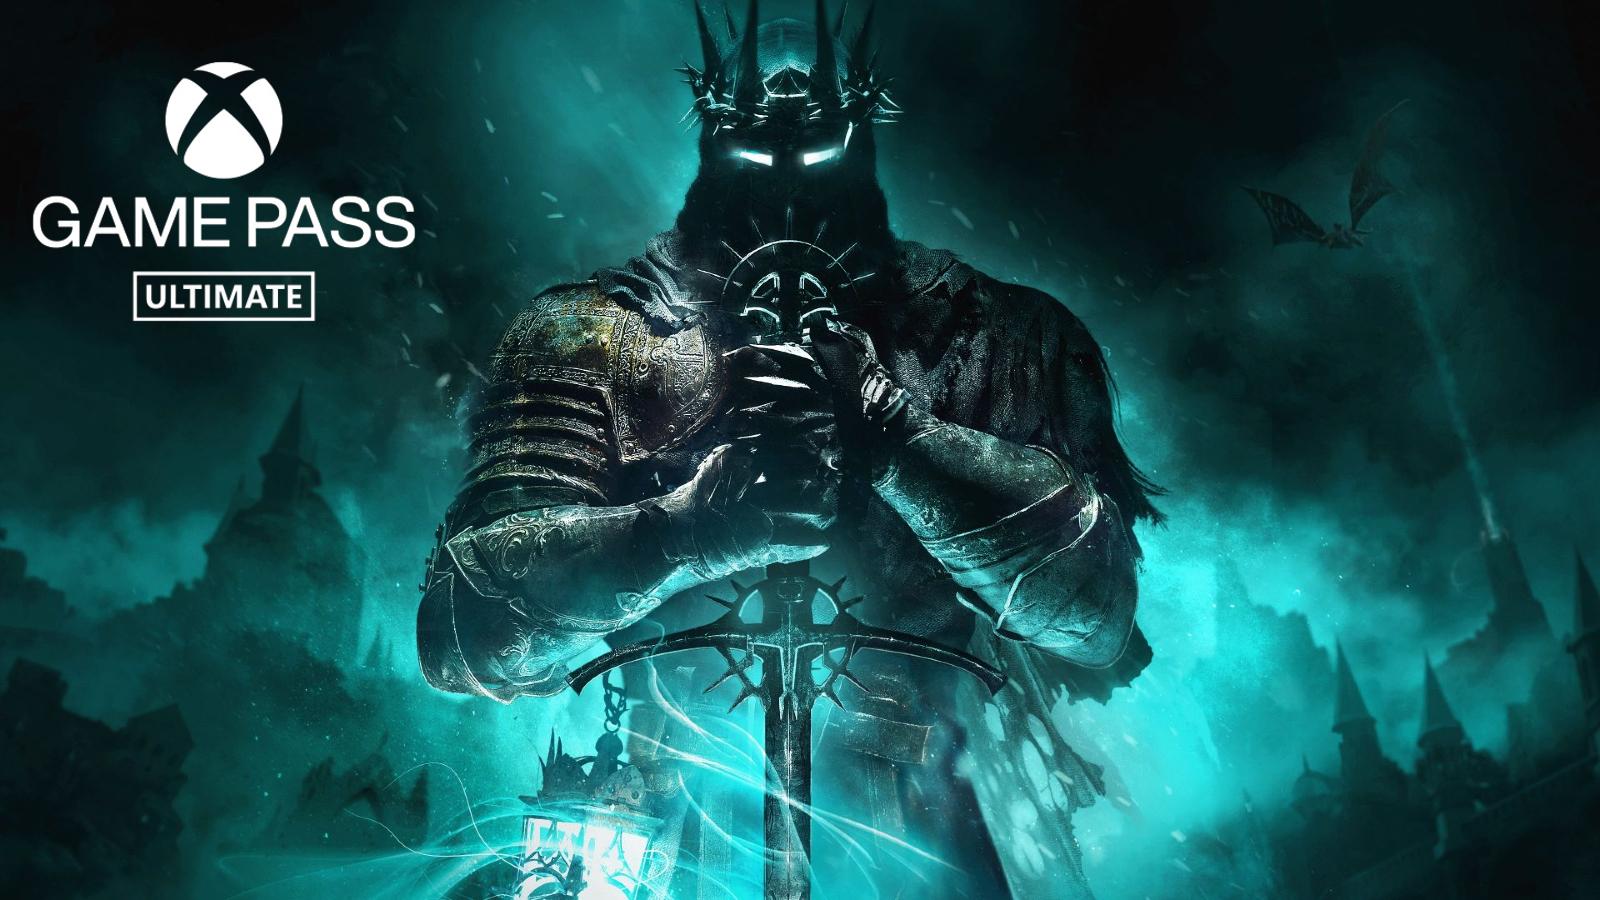 Is Lords of the Fallen coming to Xbox Game Pass? - Dexerto